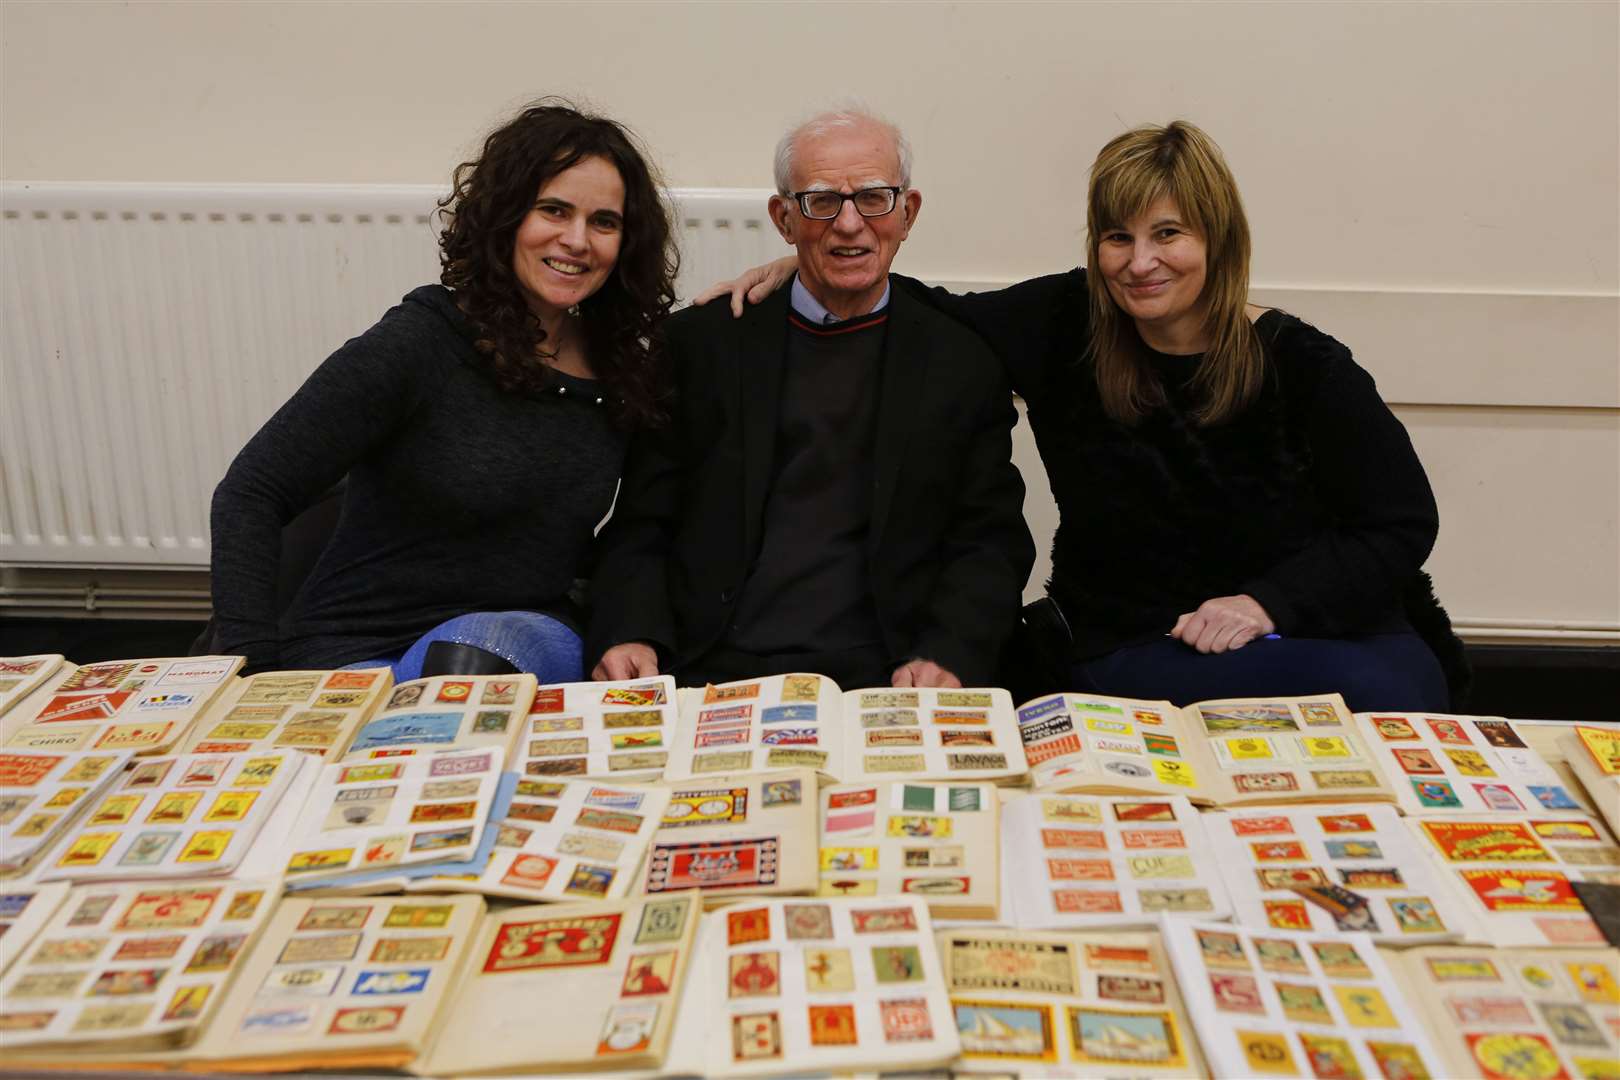 Tracey Gerred-Mumbray, Donald Tighe & Julie Gerred - Donald has one of the society's biggest collections of matchbox labels. Picture: Andy Jones (7826223)